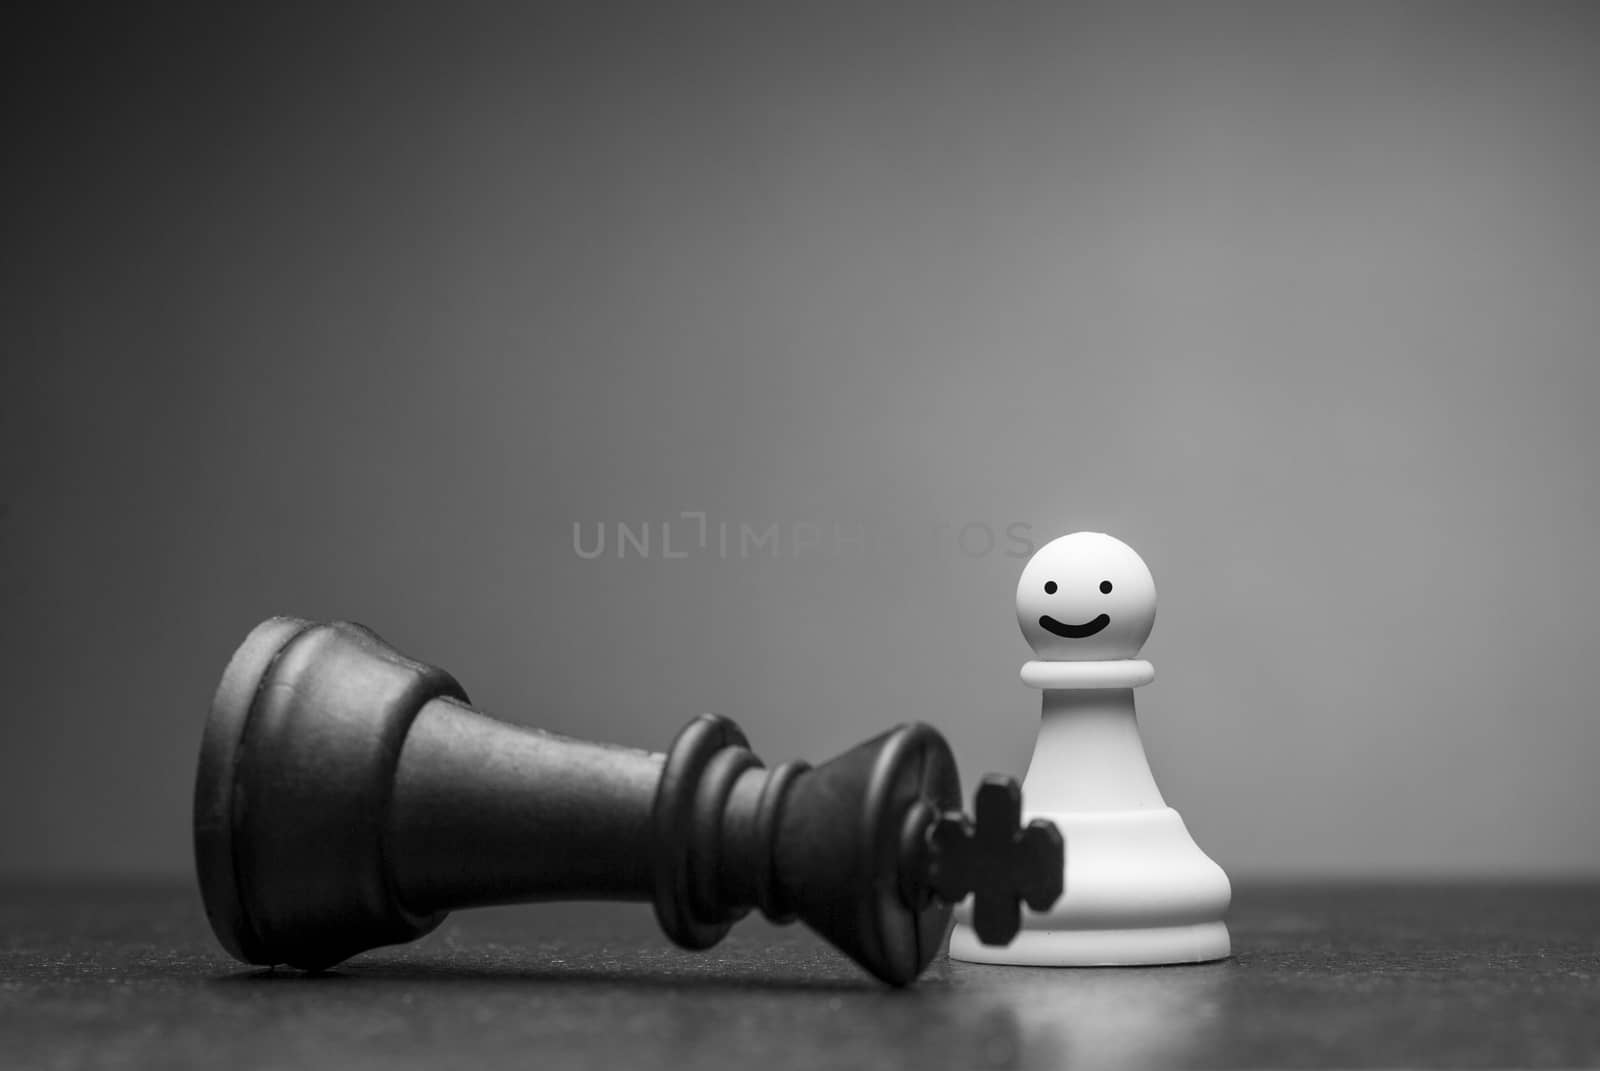 White pawn chess piece smiling at a fallen black king over a grey background with copy space in a conceptual image